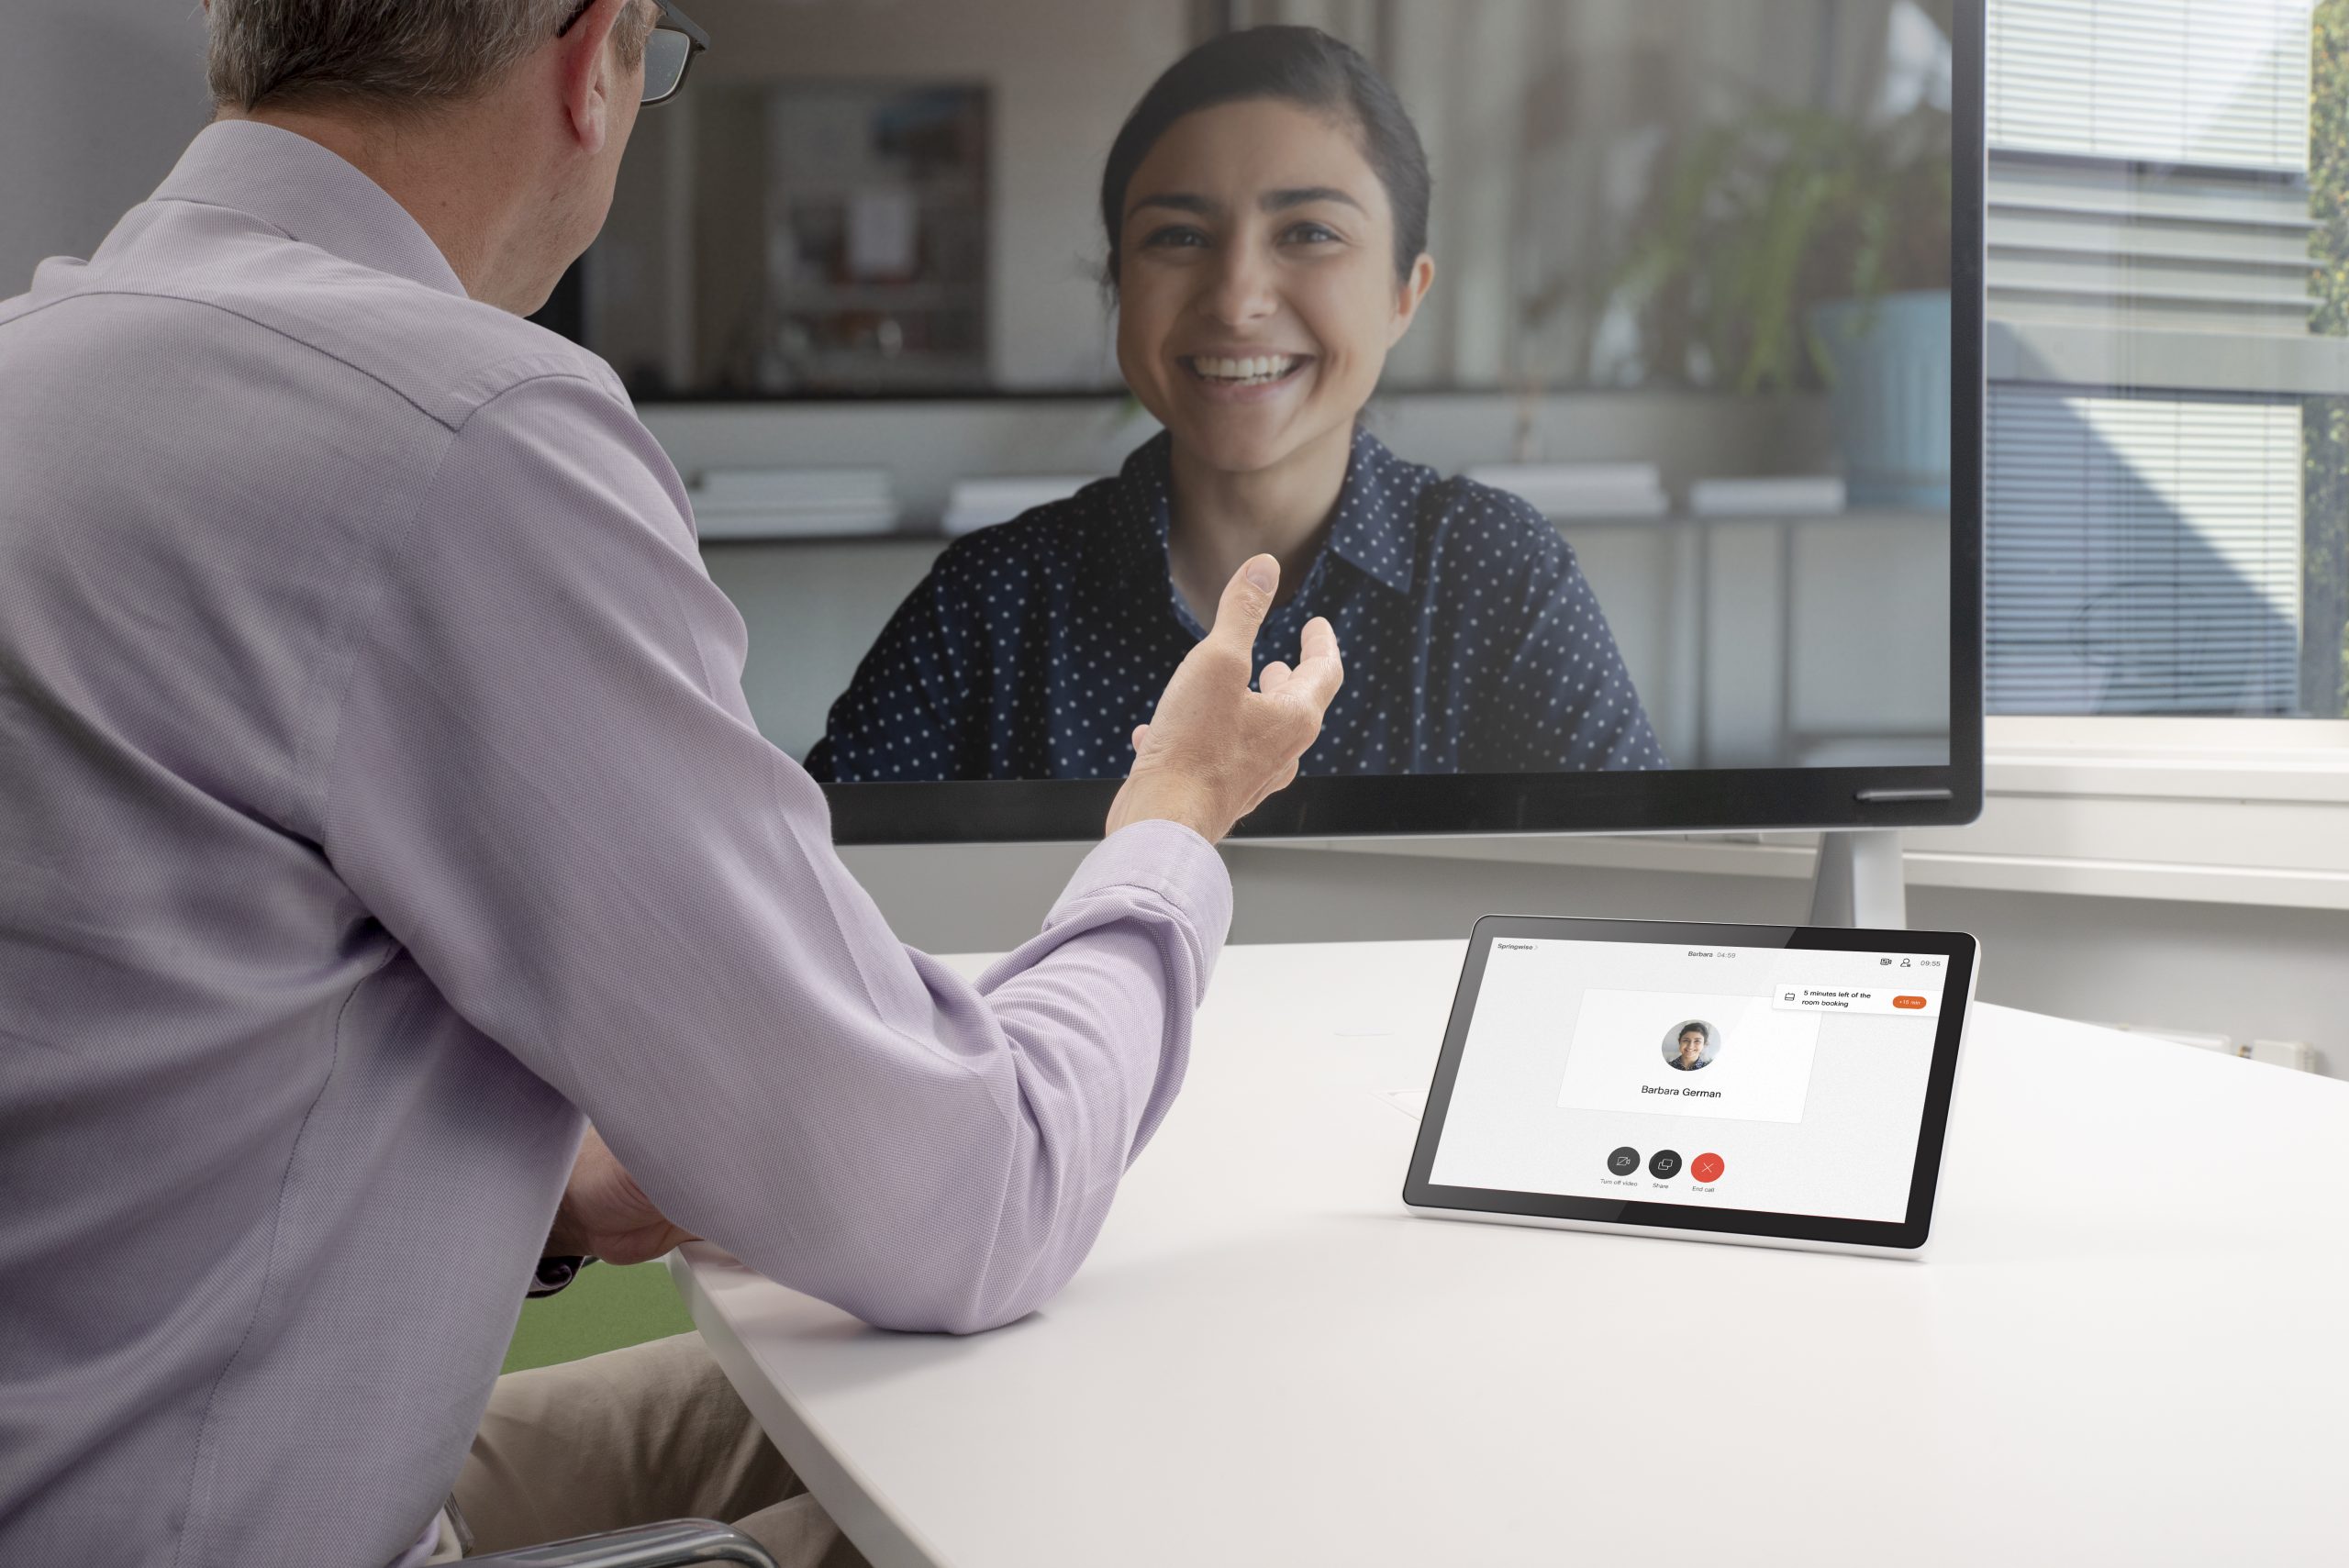 Webex Room Navigator inside the room proposes users to extend the reservation while in a call